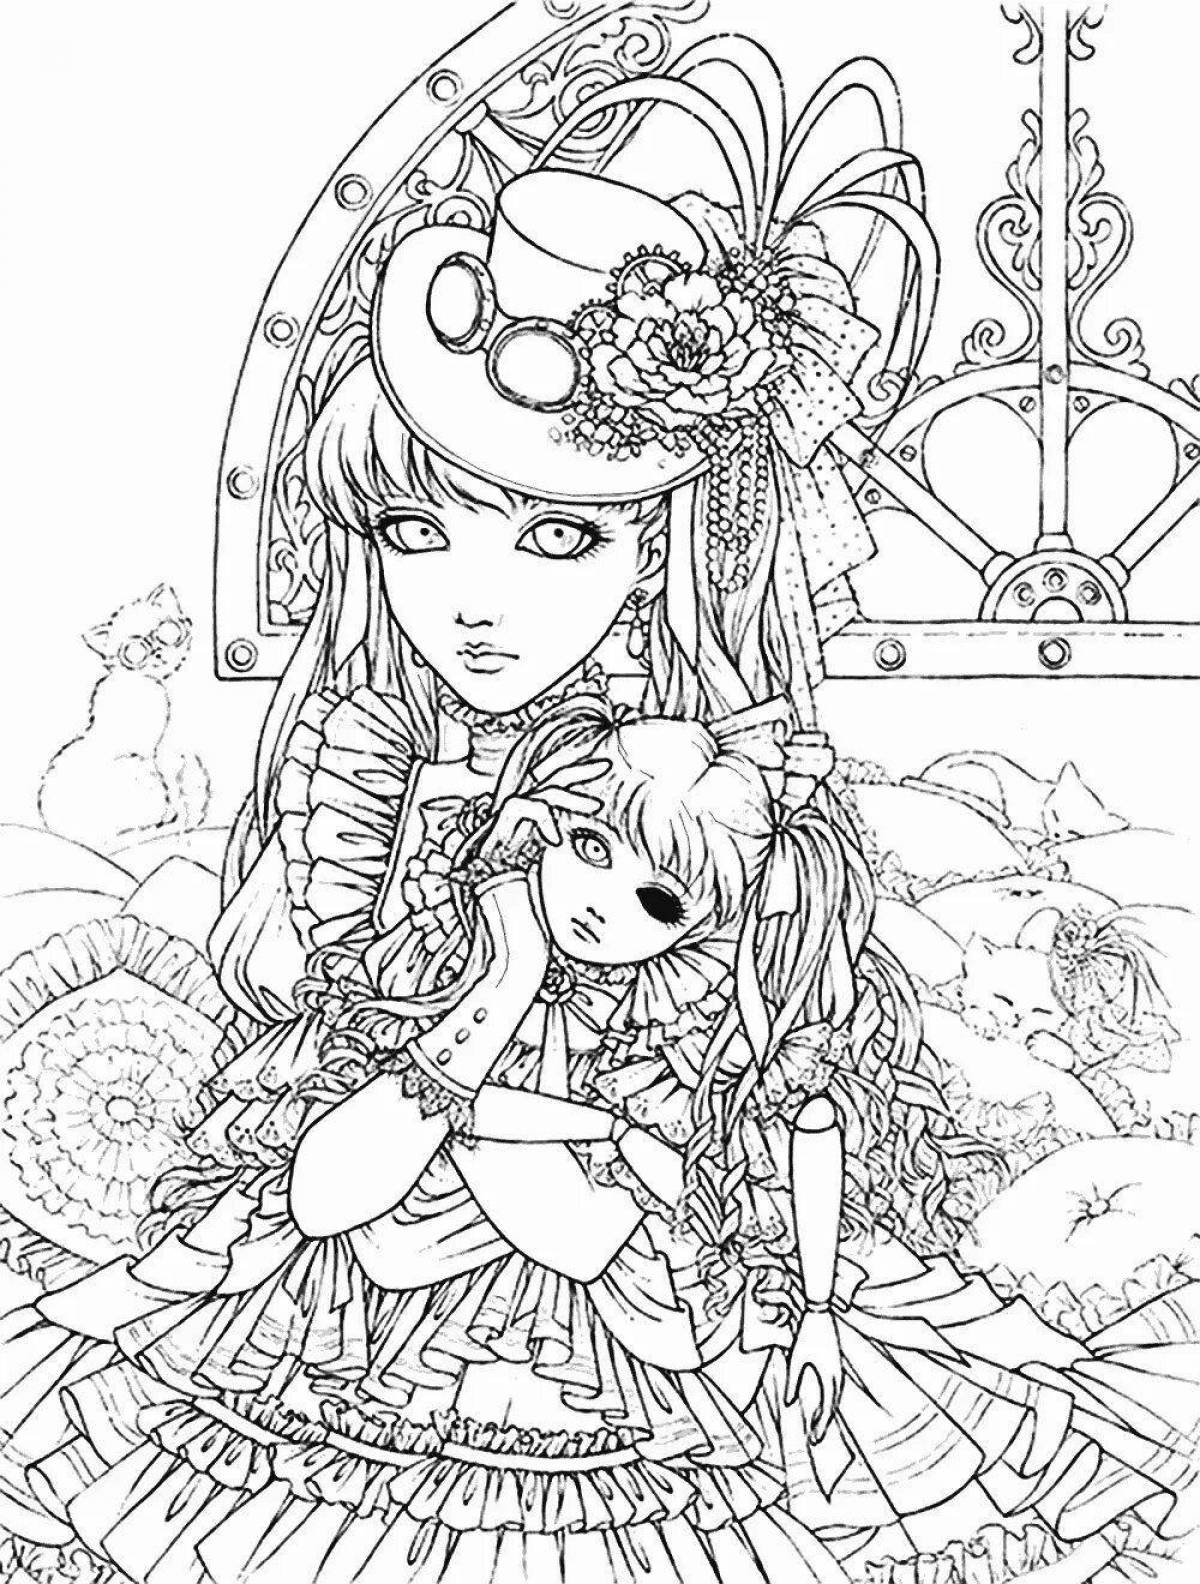 Amazing anime style antistress coloring book